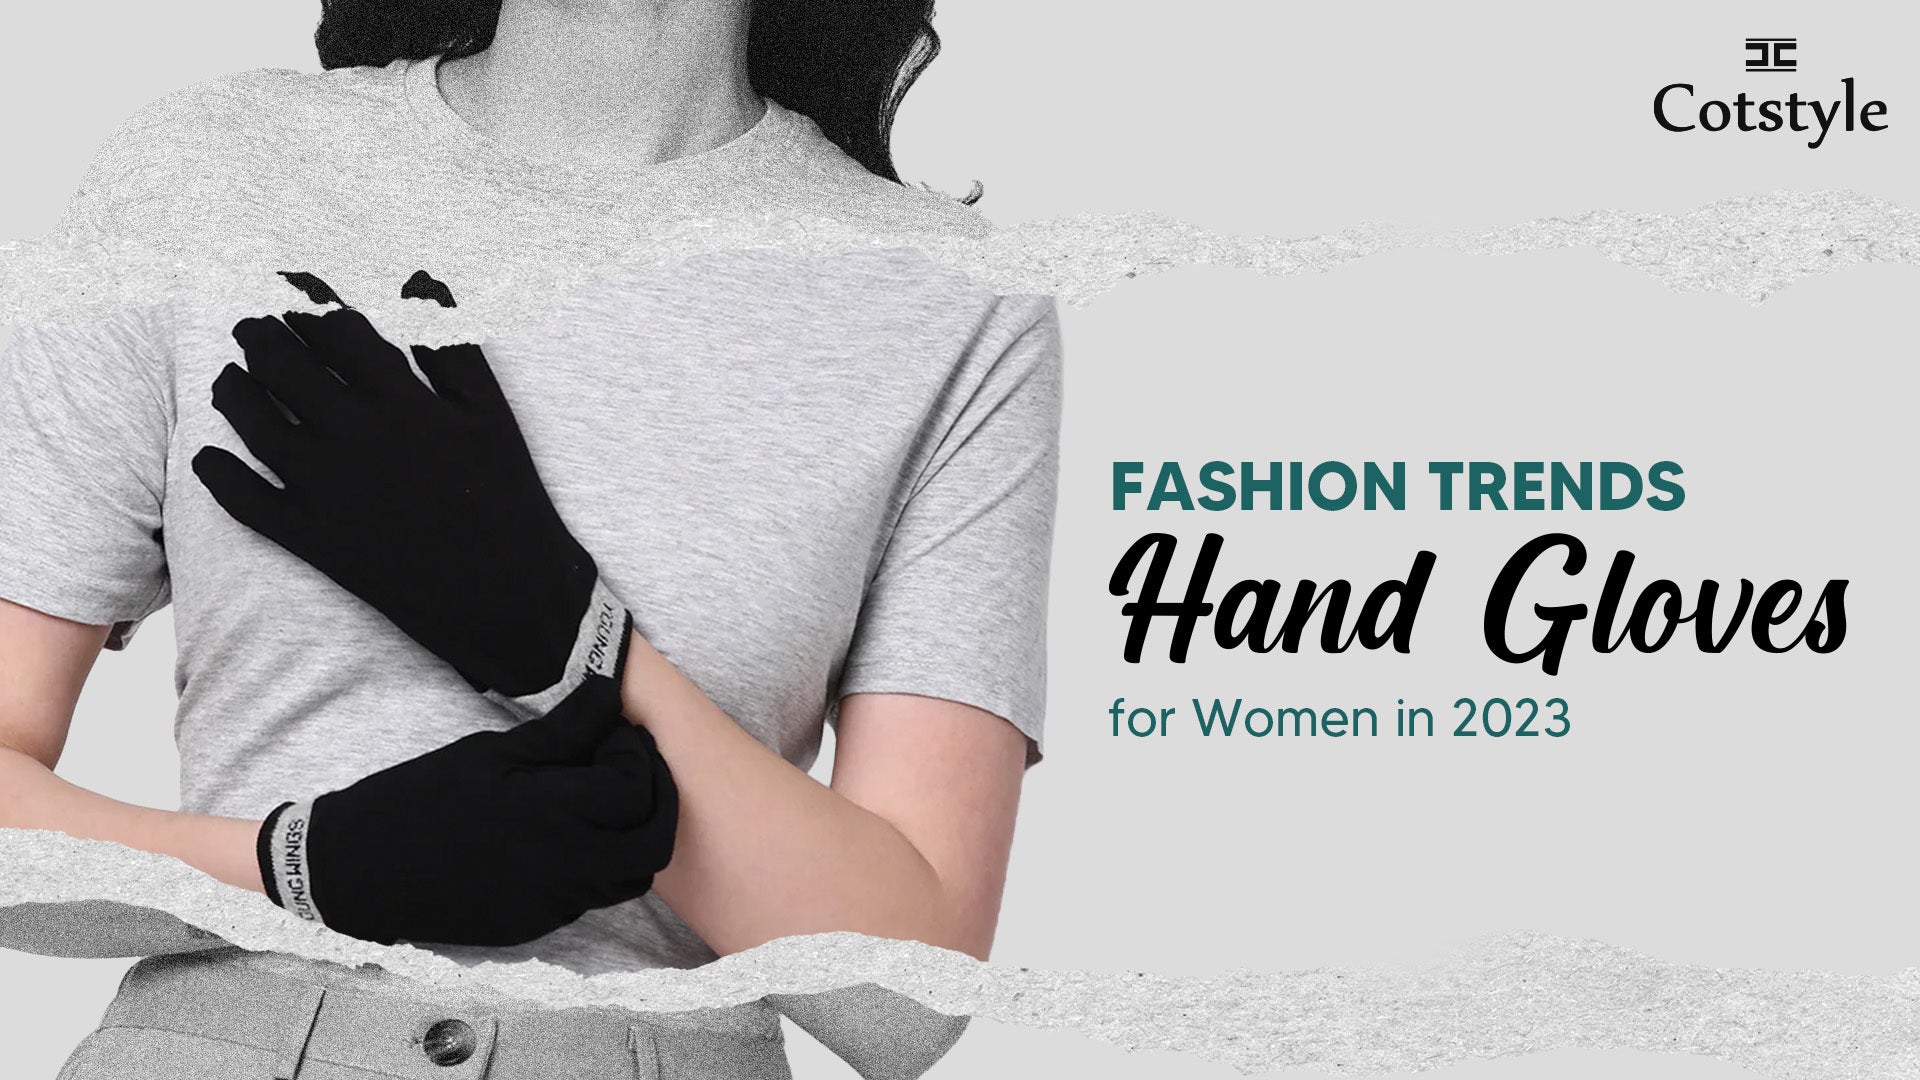 Fashion Trends in Hand Gloves for Women in 2023